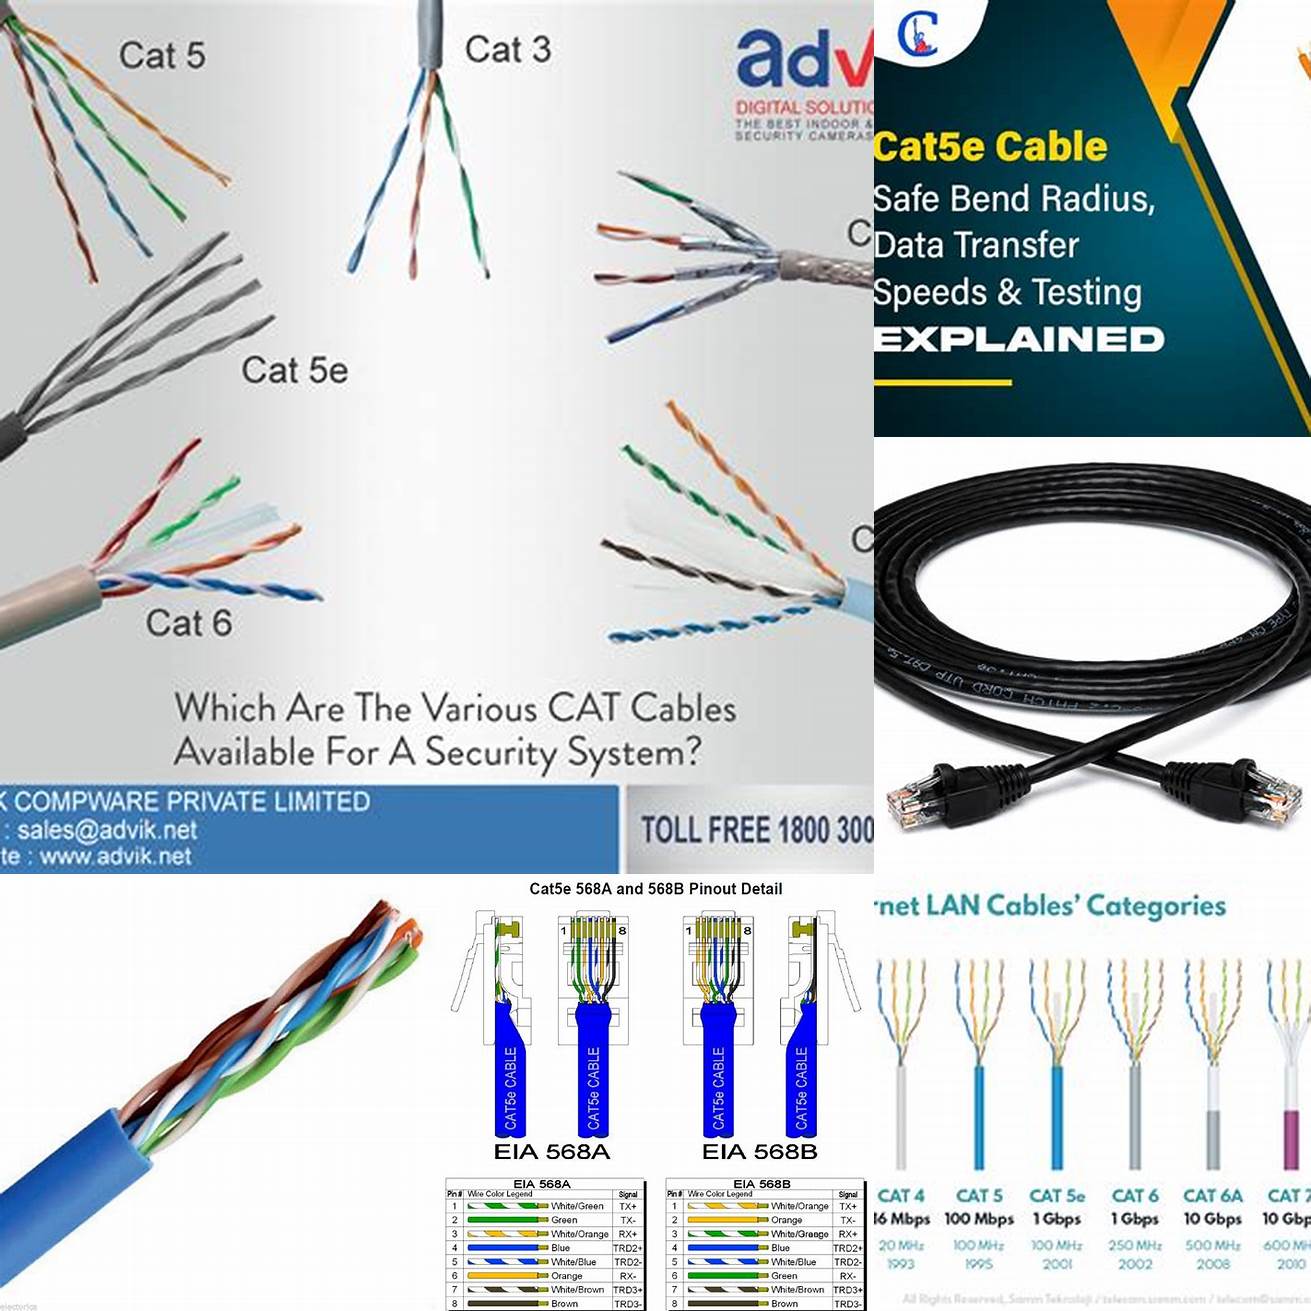 1 Cat 5 cables can transmit data at speeds up to 100Mbps